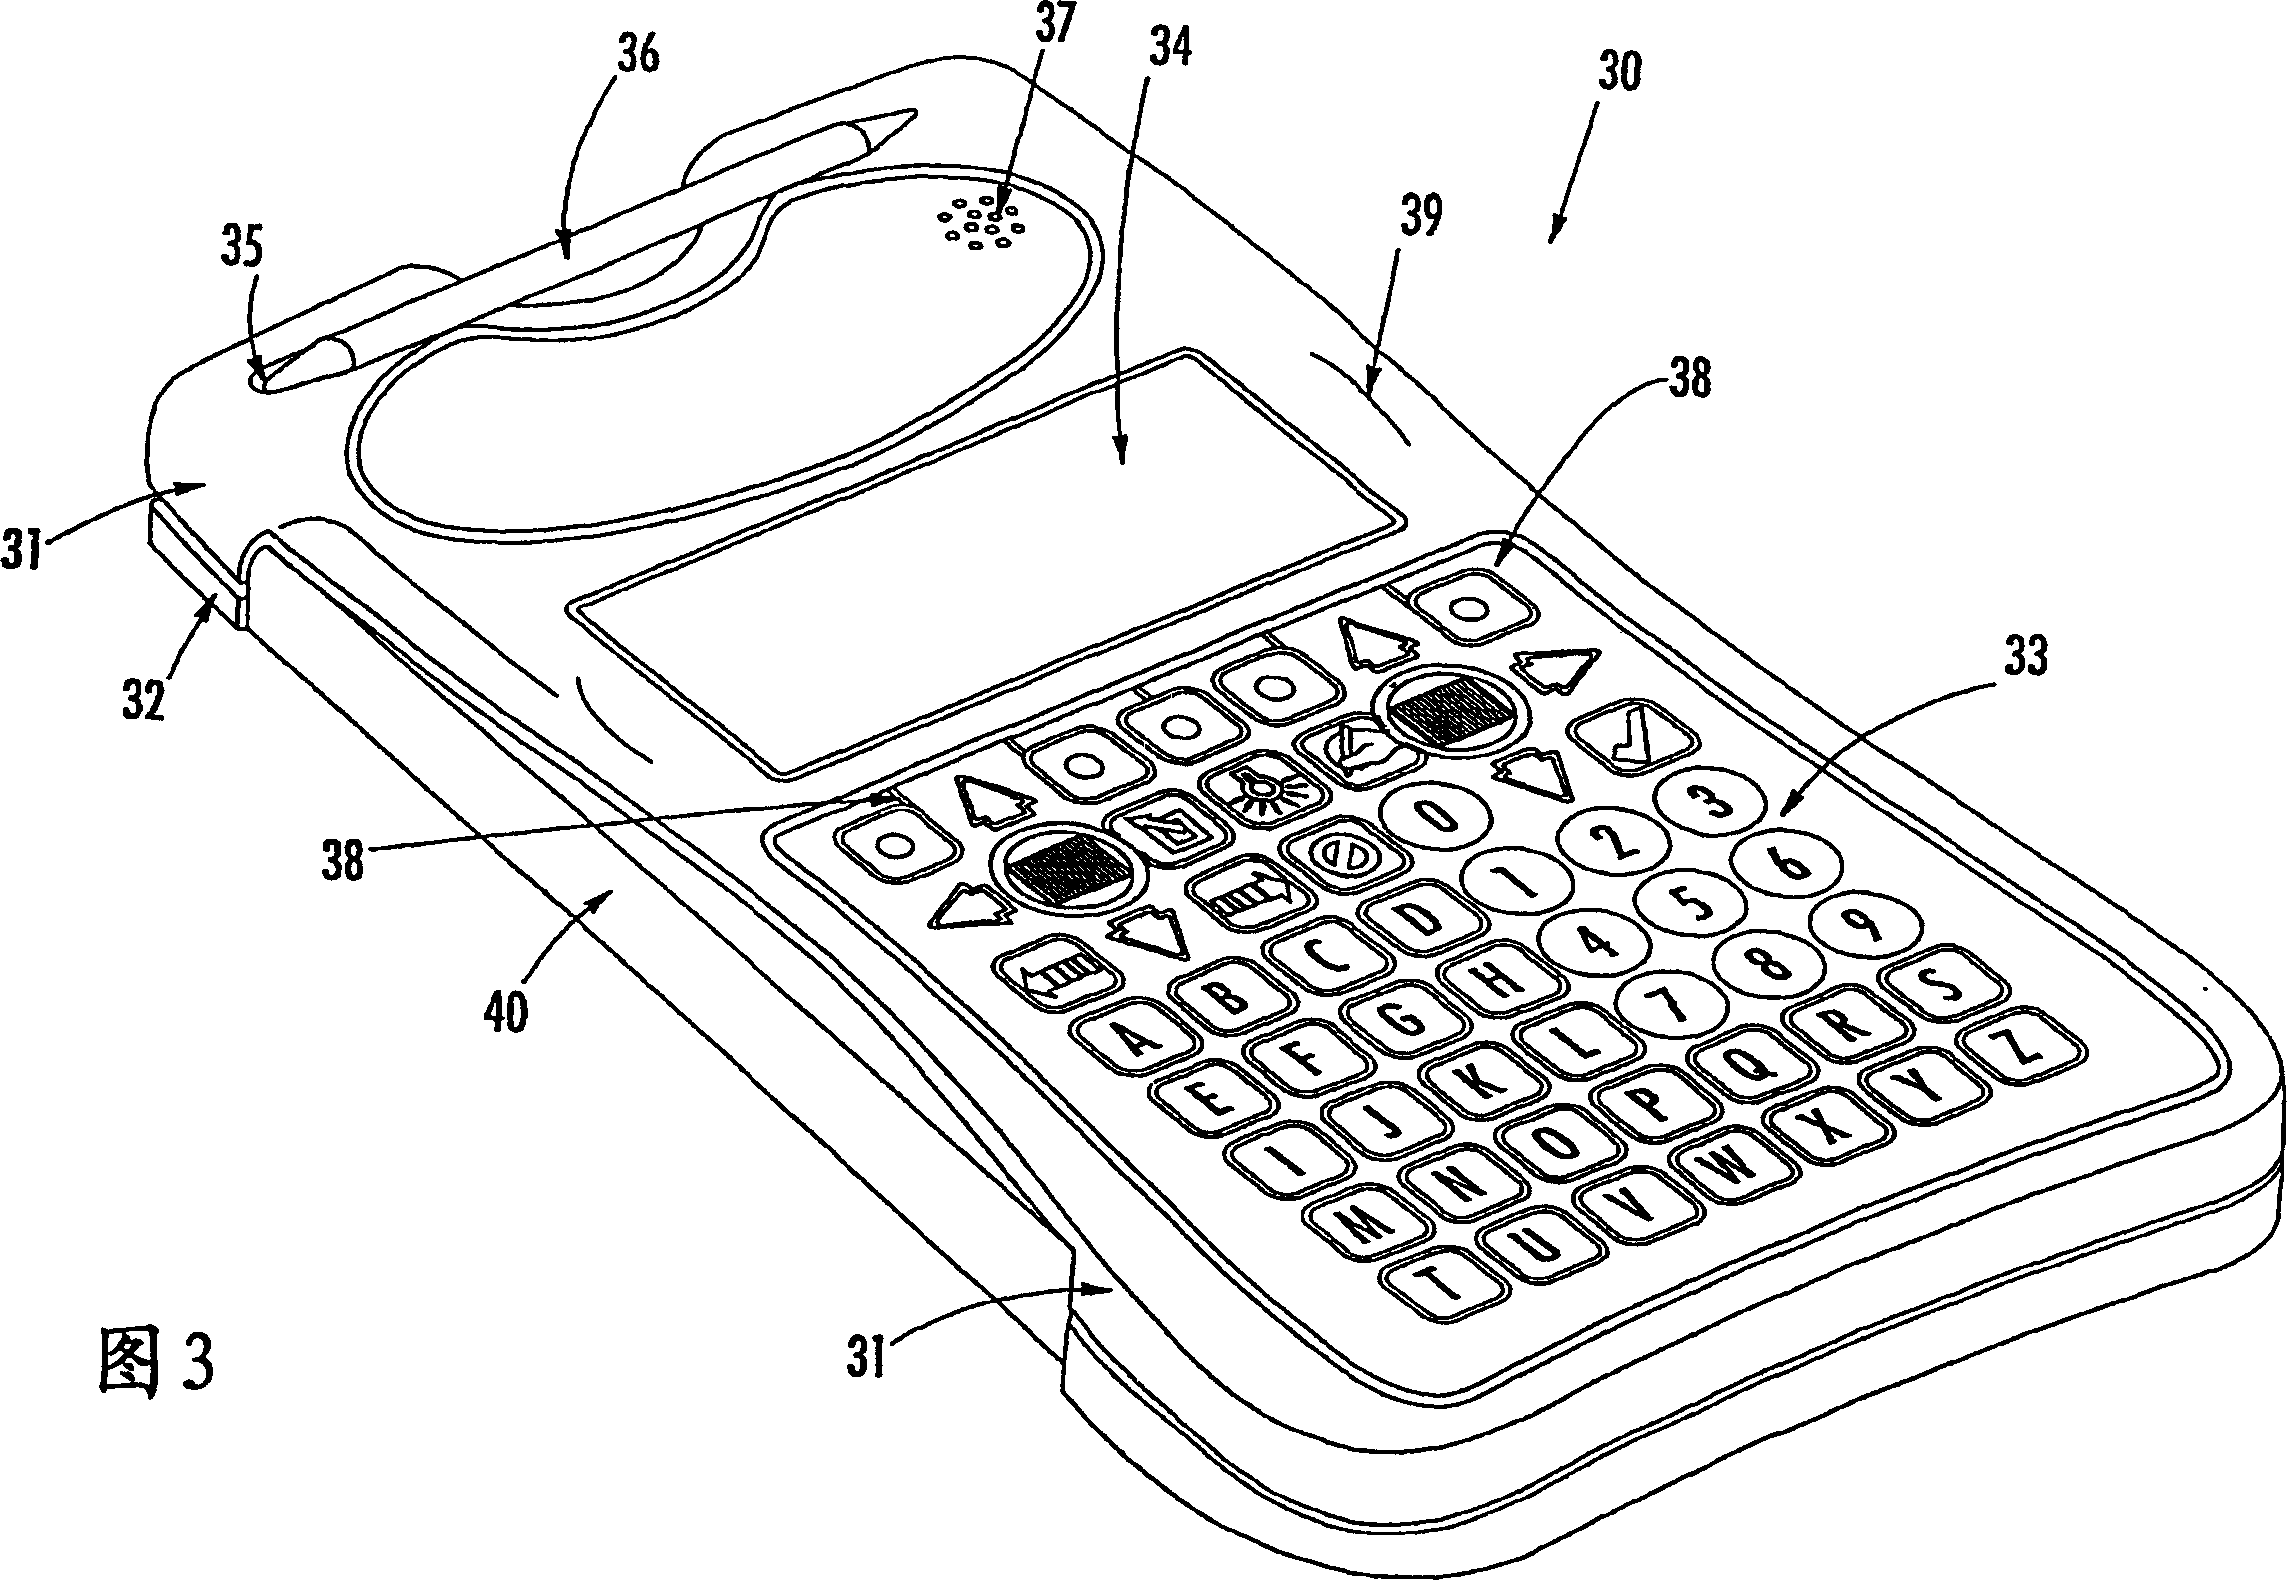 Systems, methods and apparatus for real-time tracking of packages